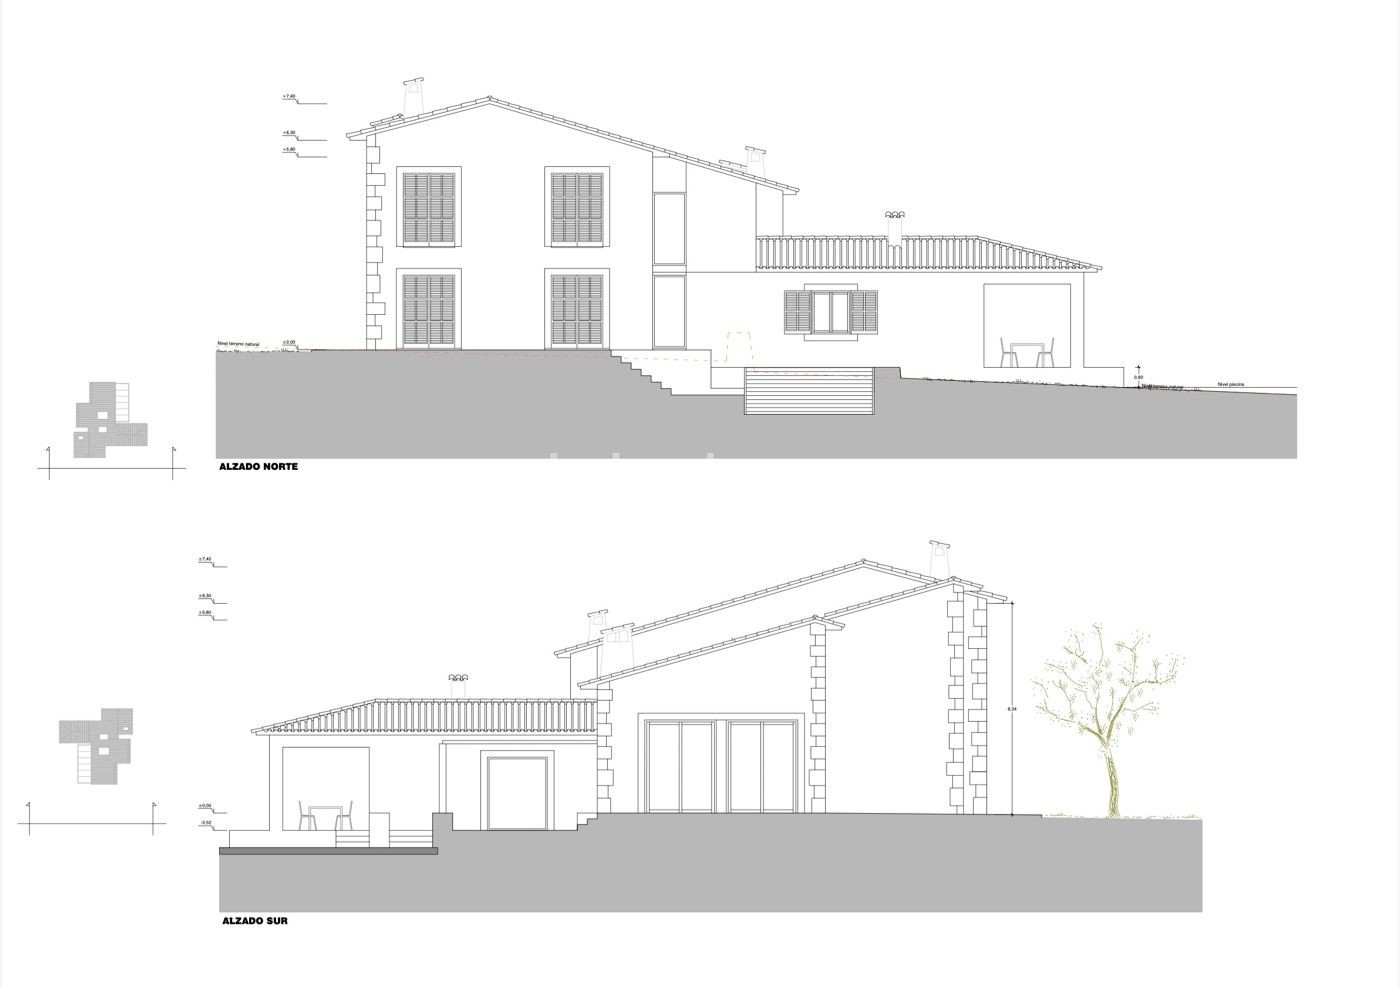 Modern new finca in Alaró with beautiful mountain views, large plot of land high qualities